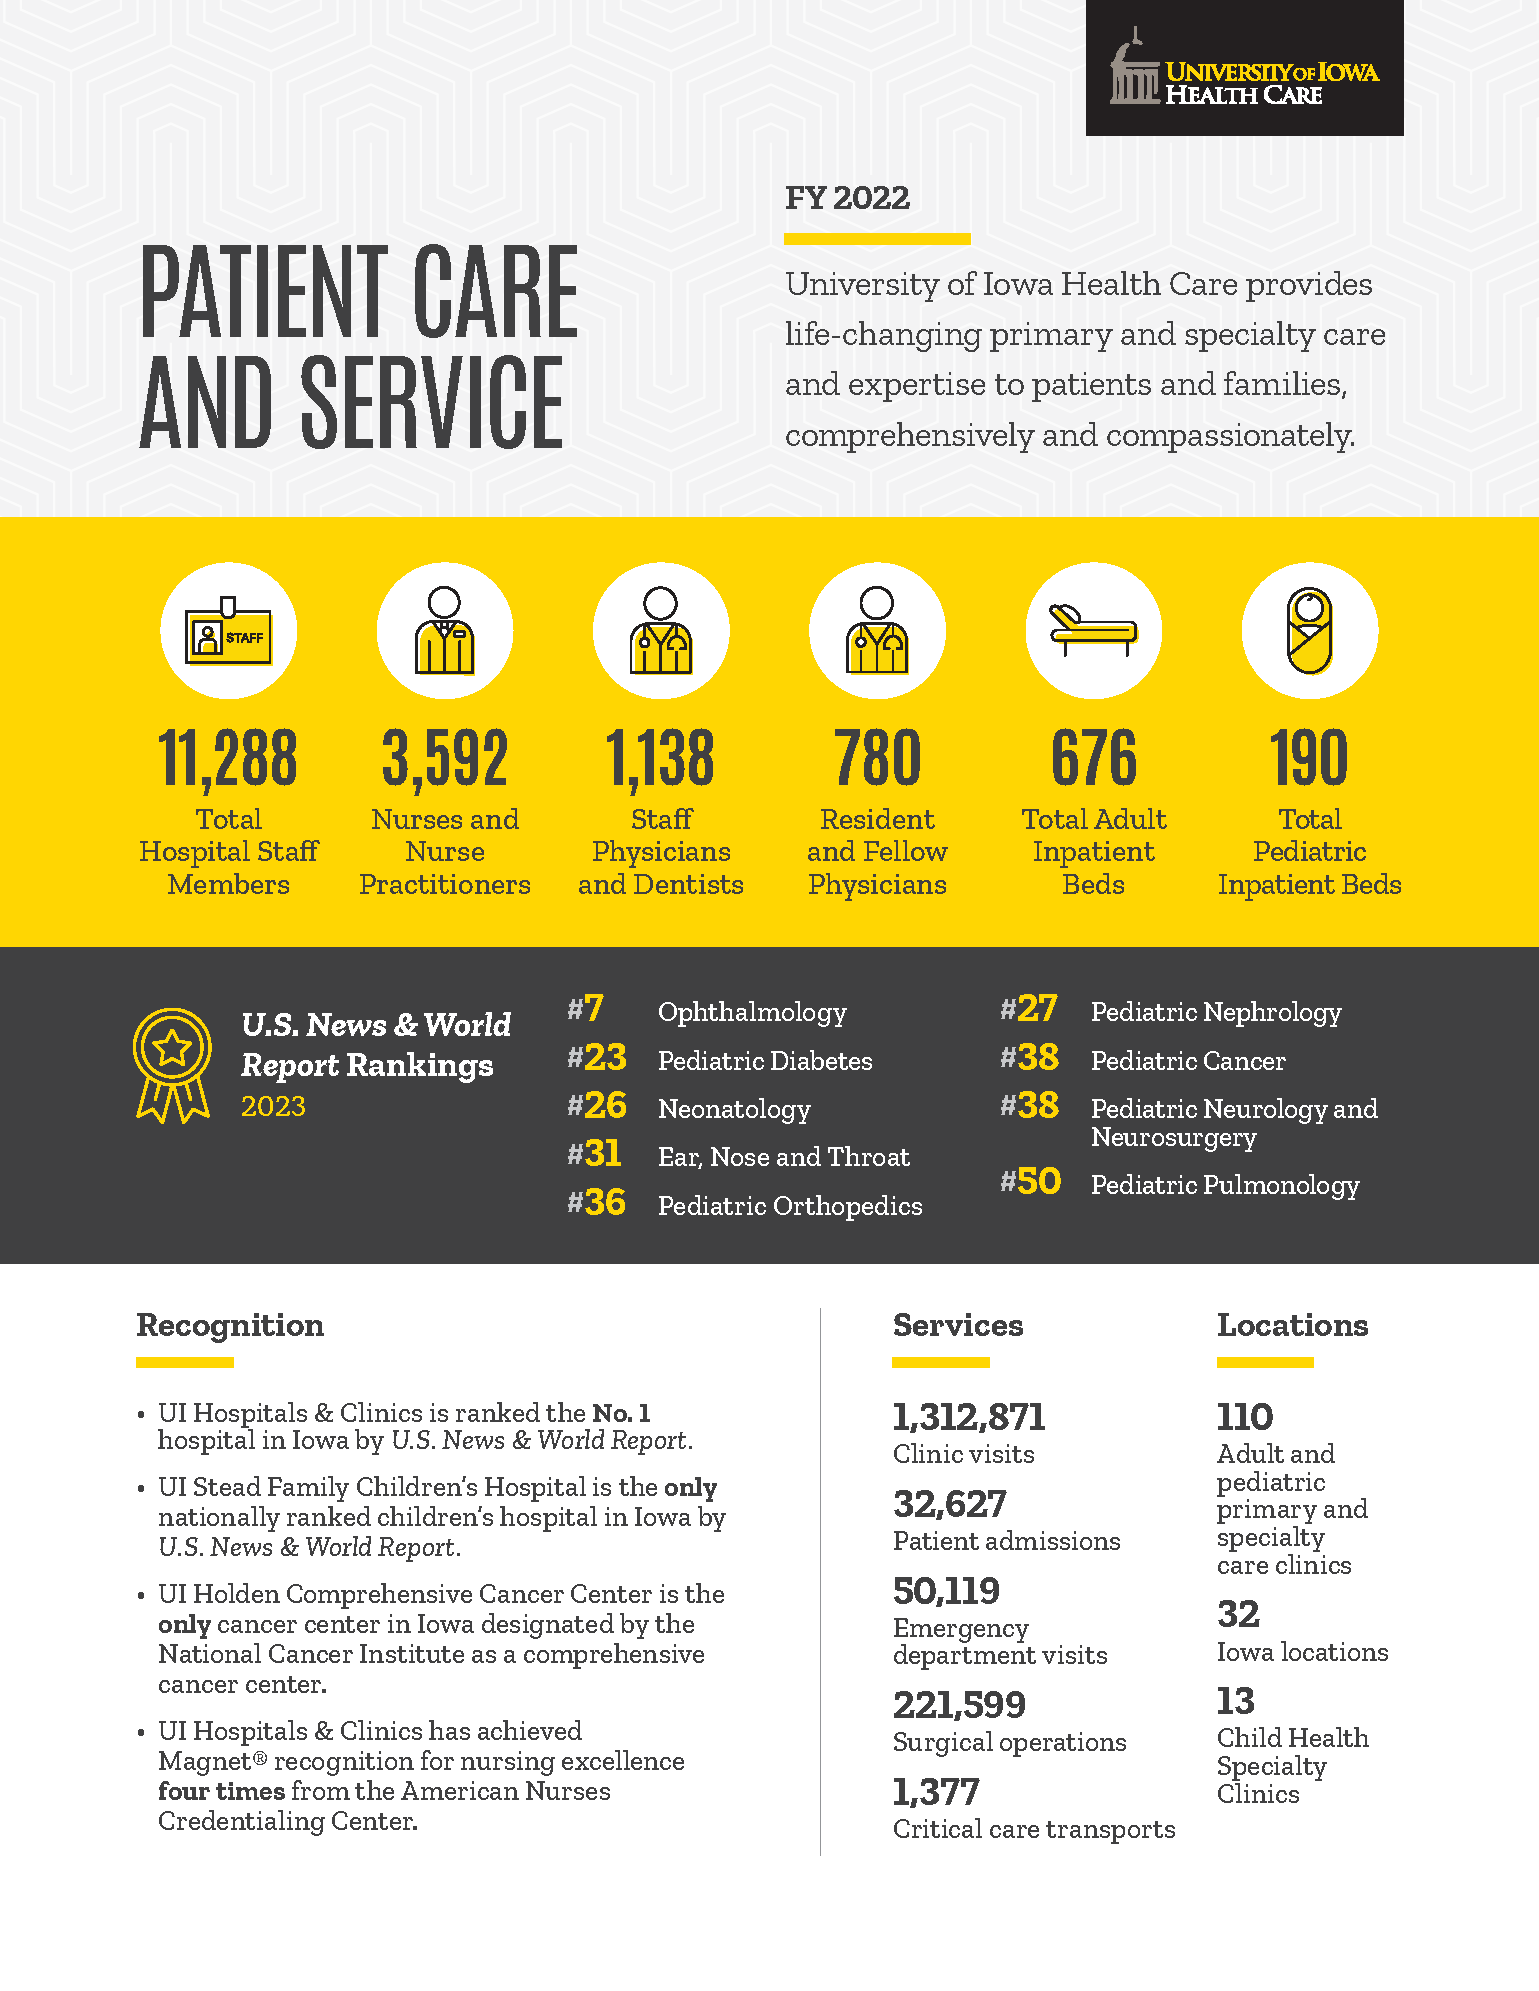 Patient Care and Service by the Numbers